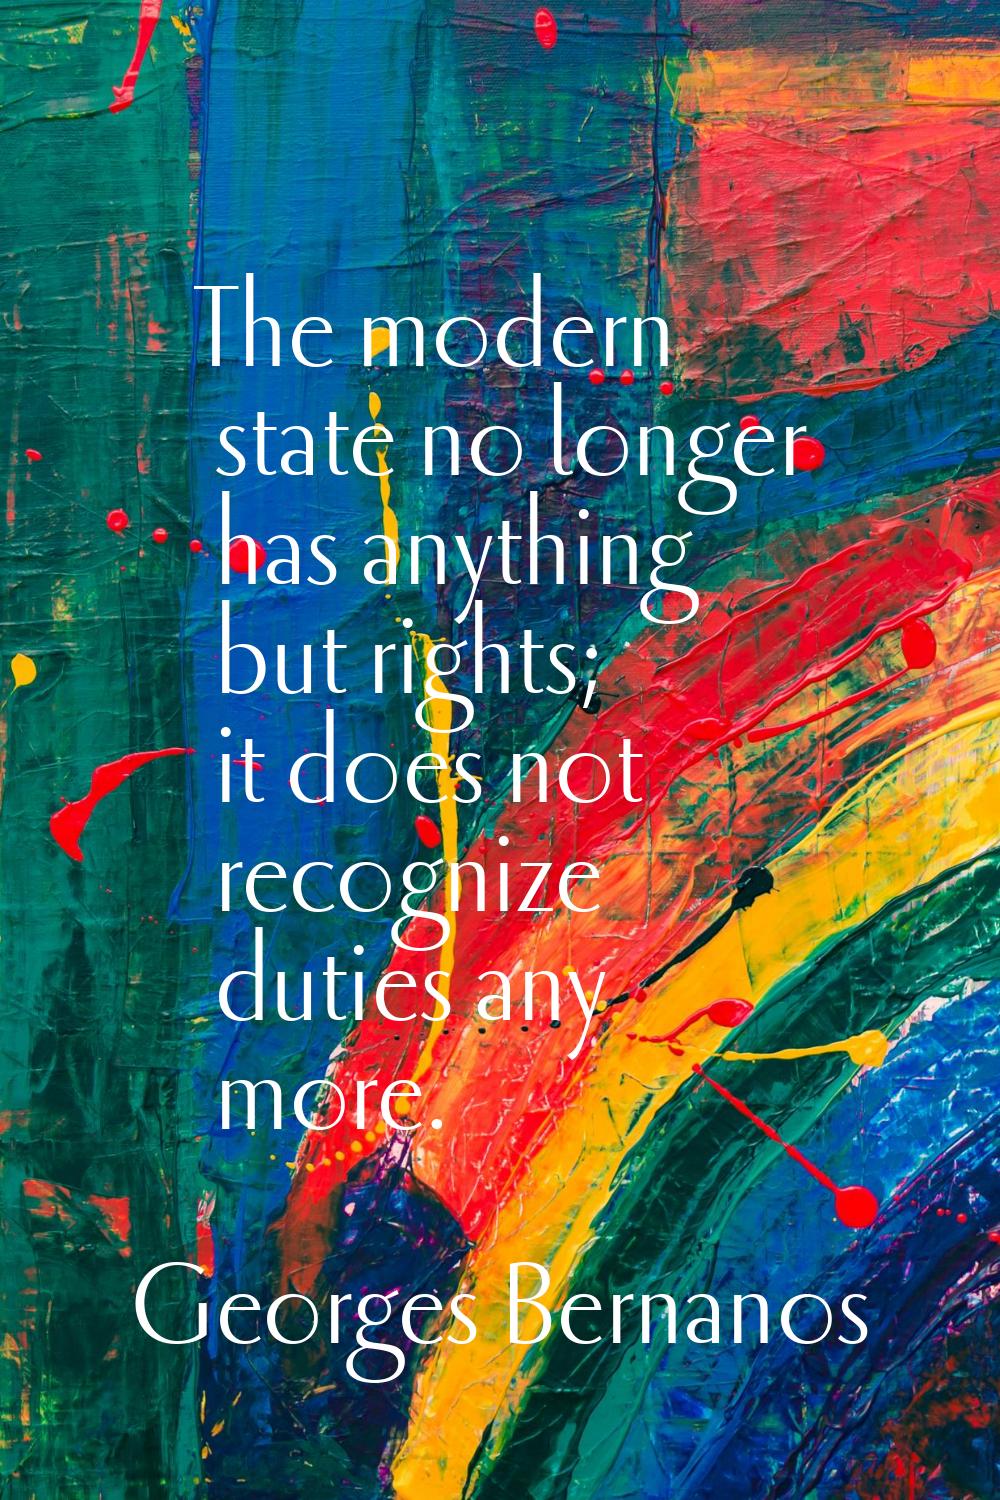 The modern state no longer has anything but rights; it does not recognize duties any more.